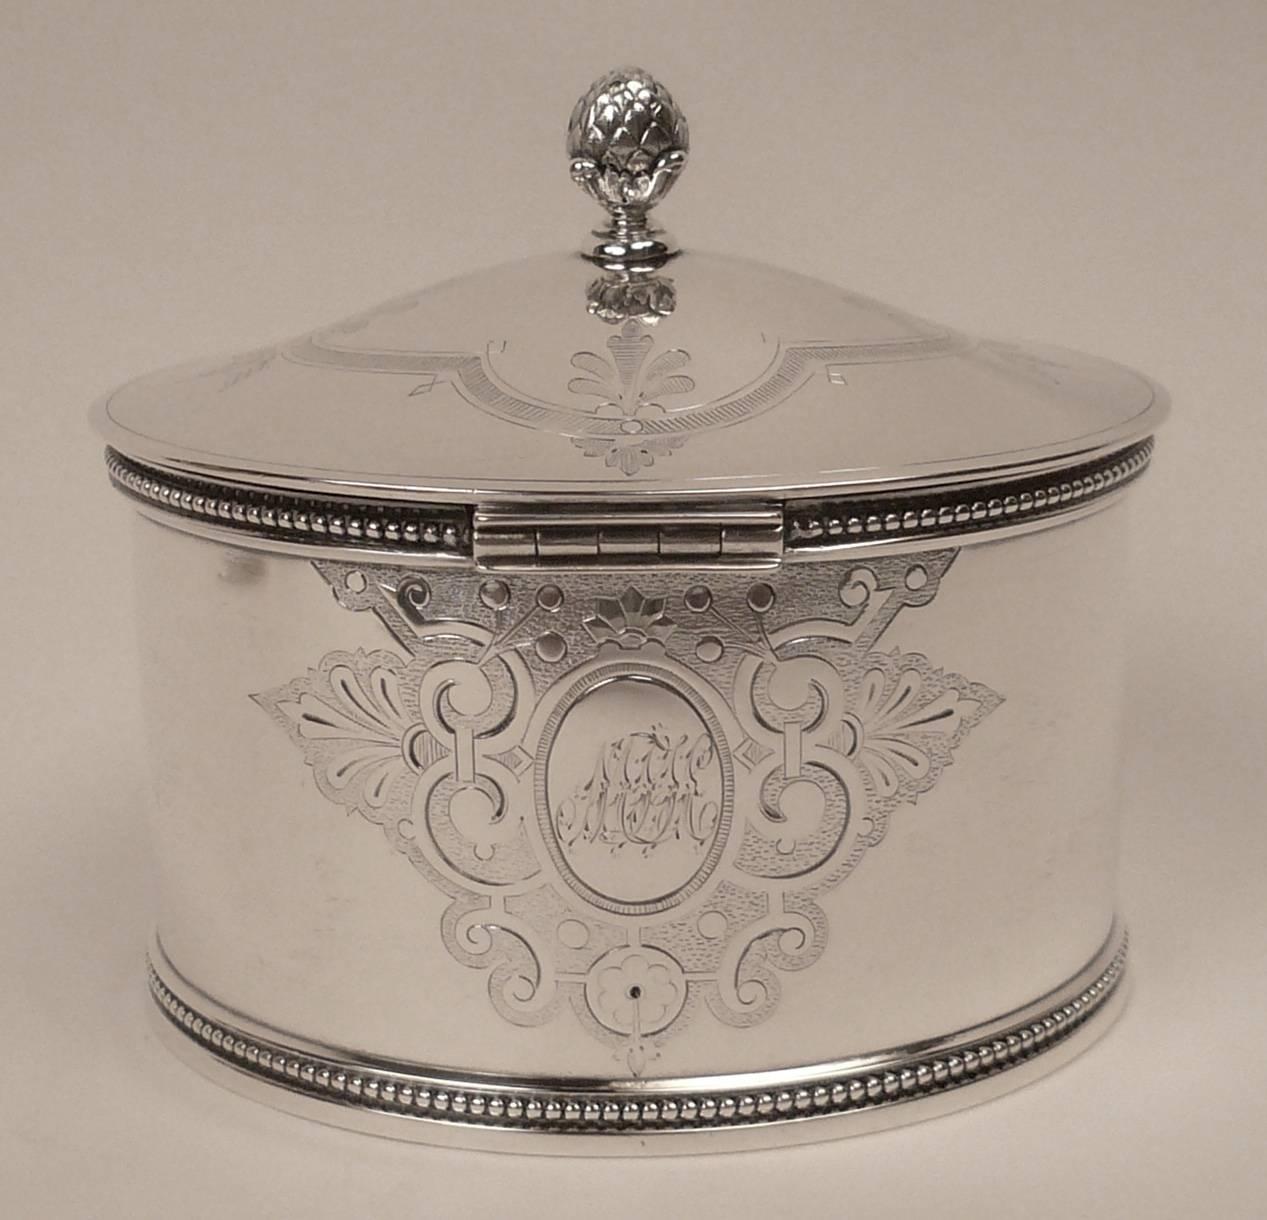 19th Century American Sterling Silver Tea Caddy by Shreve, Stanwood & Co, Boston In Excellent Condition For Sale In Pittsburgh, PA